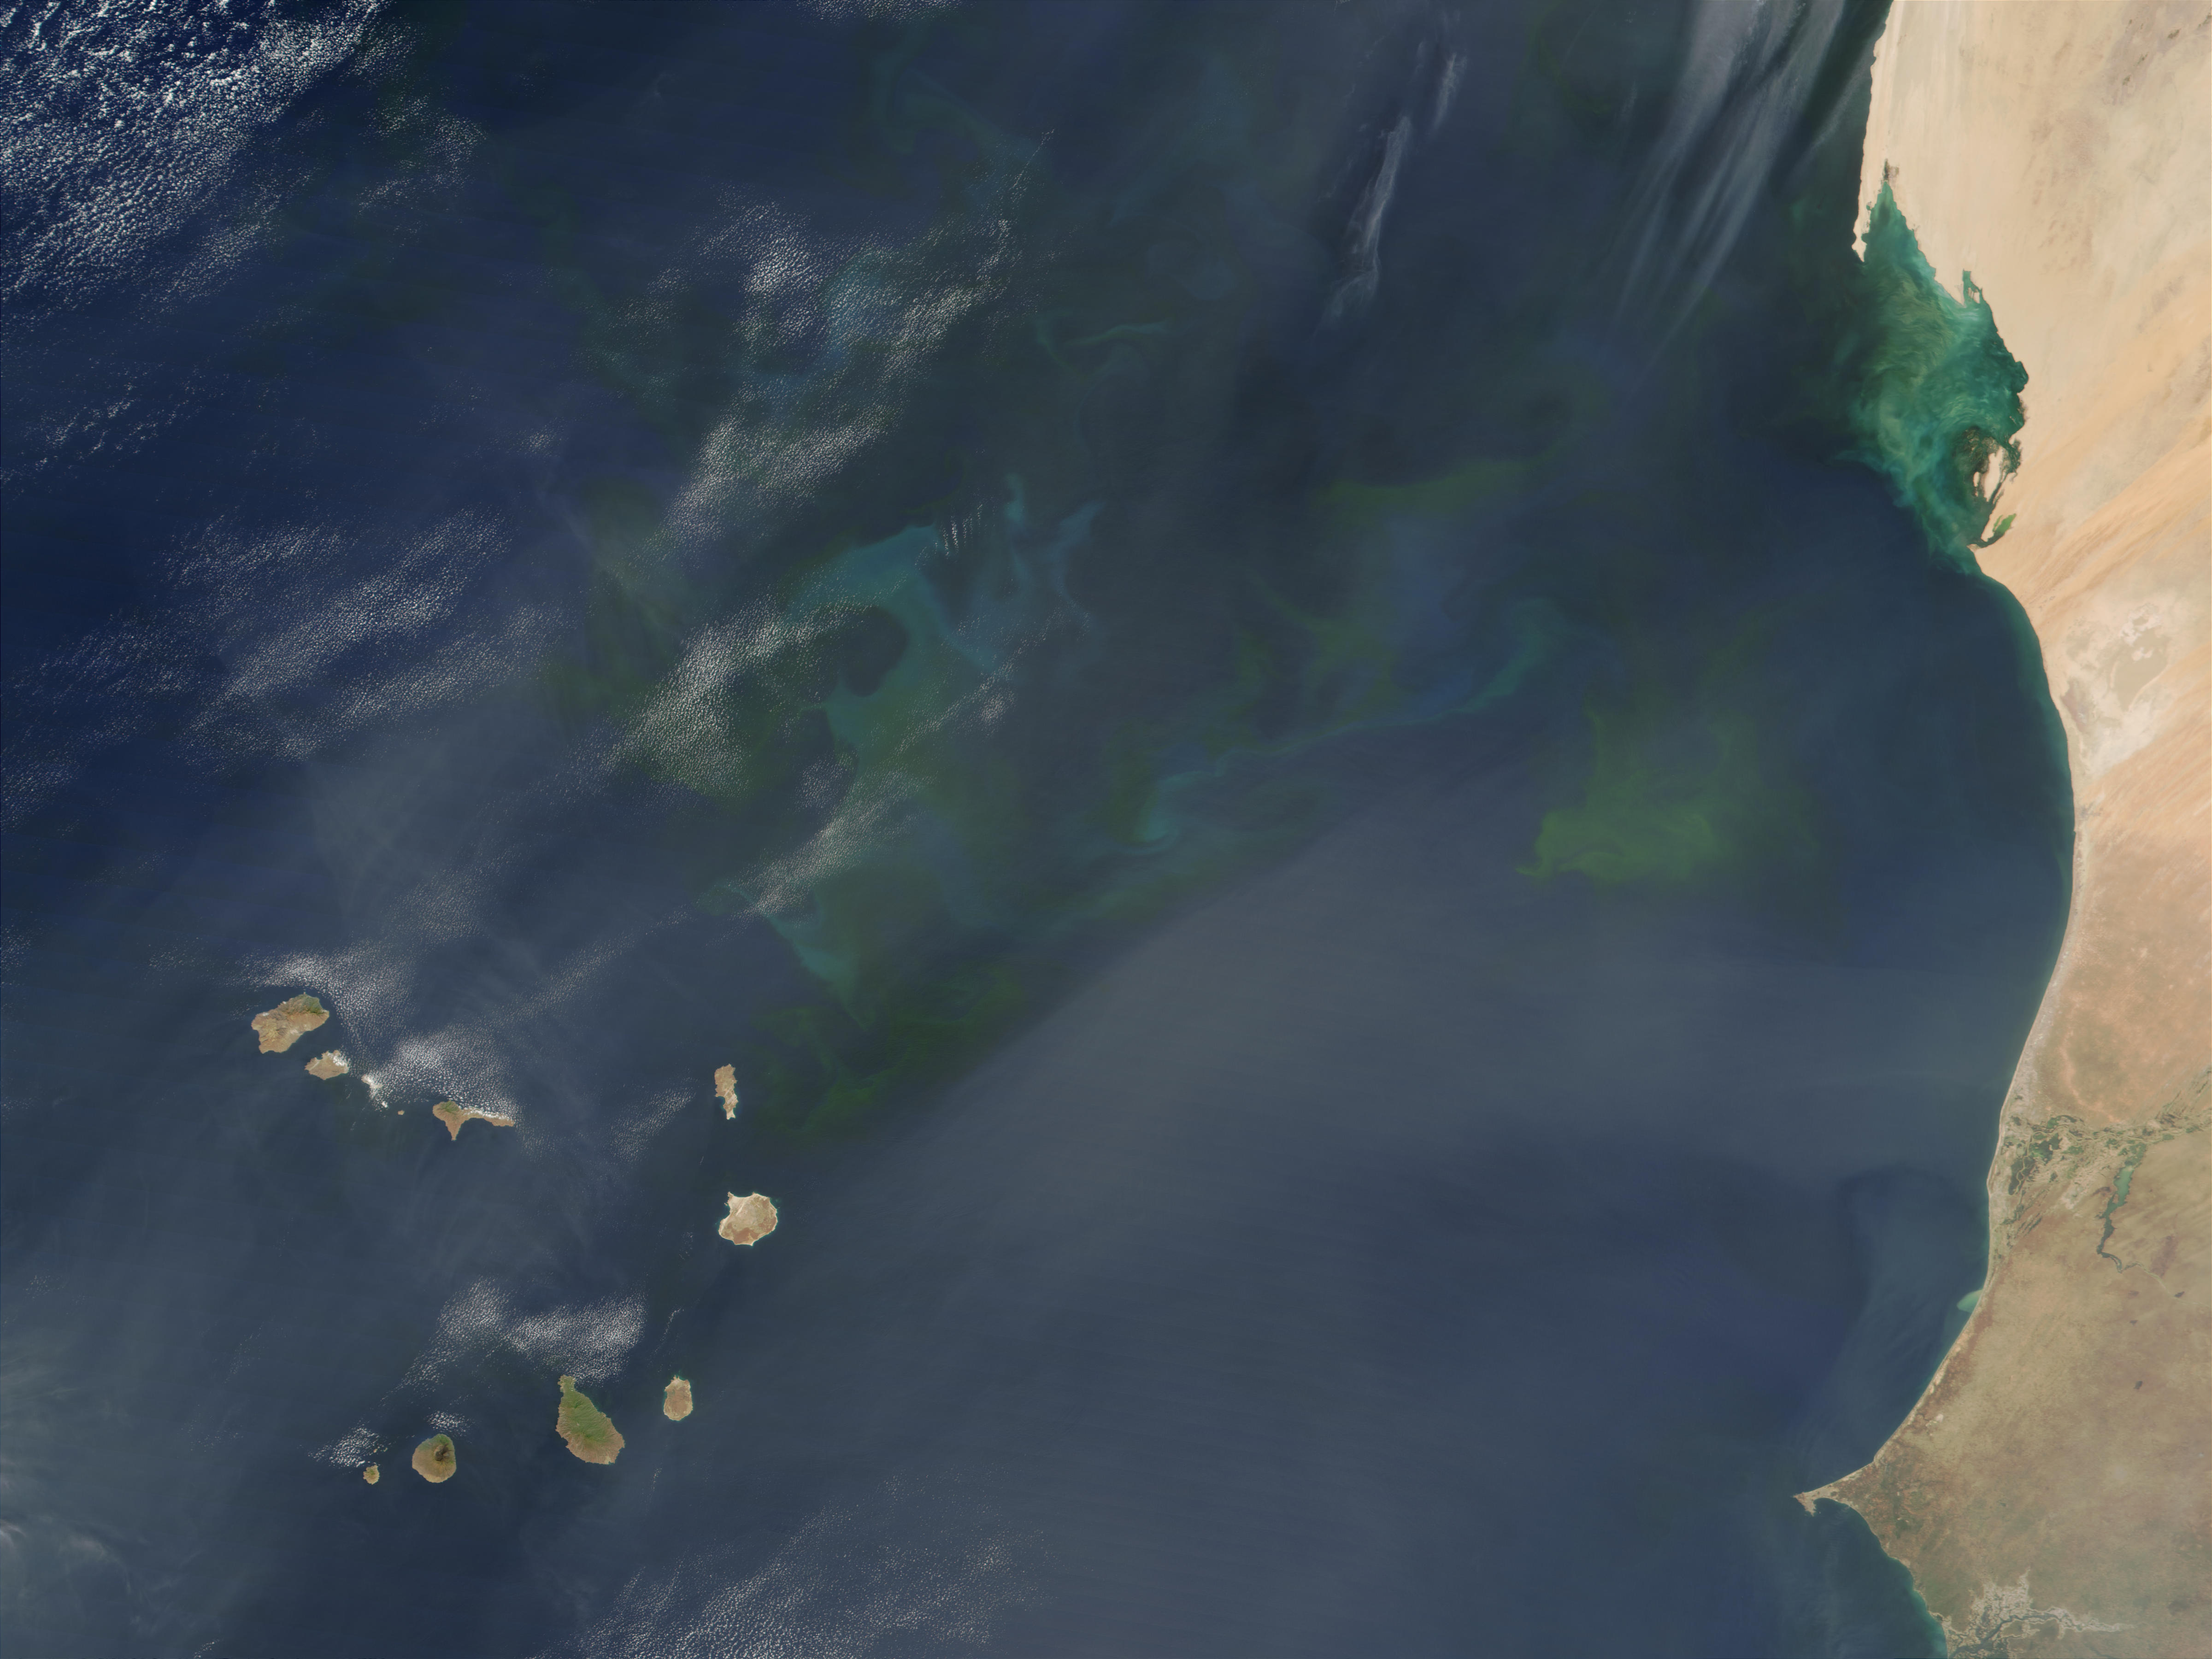 Phytoplankton bloom near Cape Verde Islands - related image preview